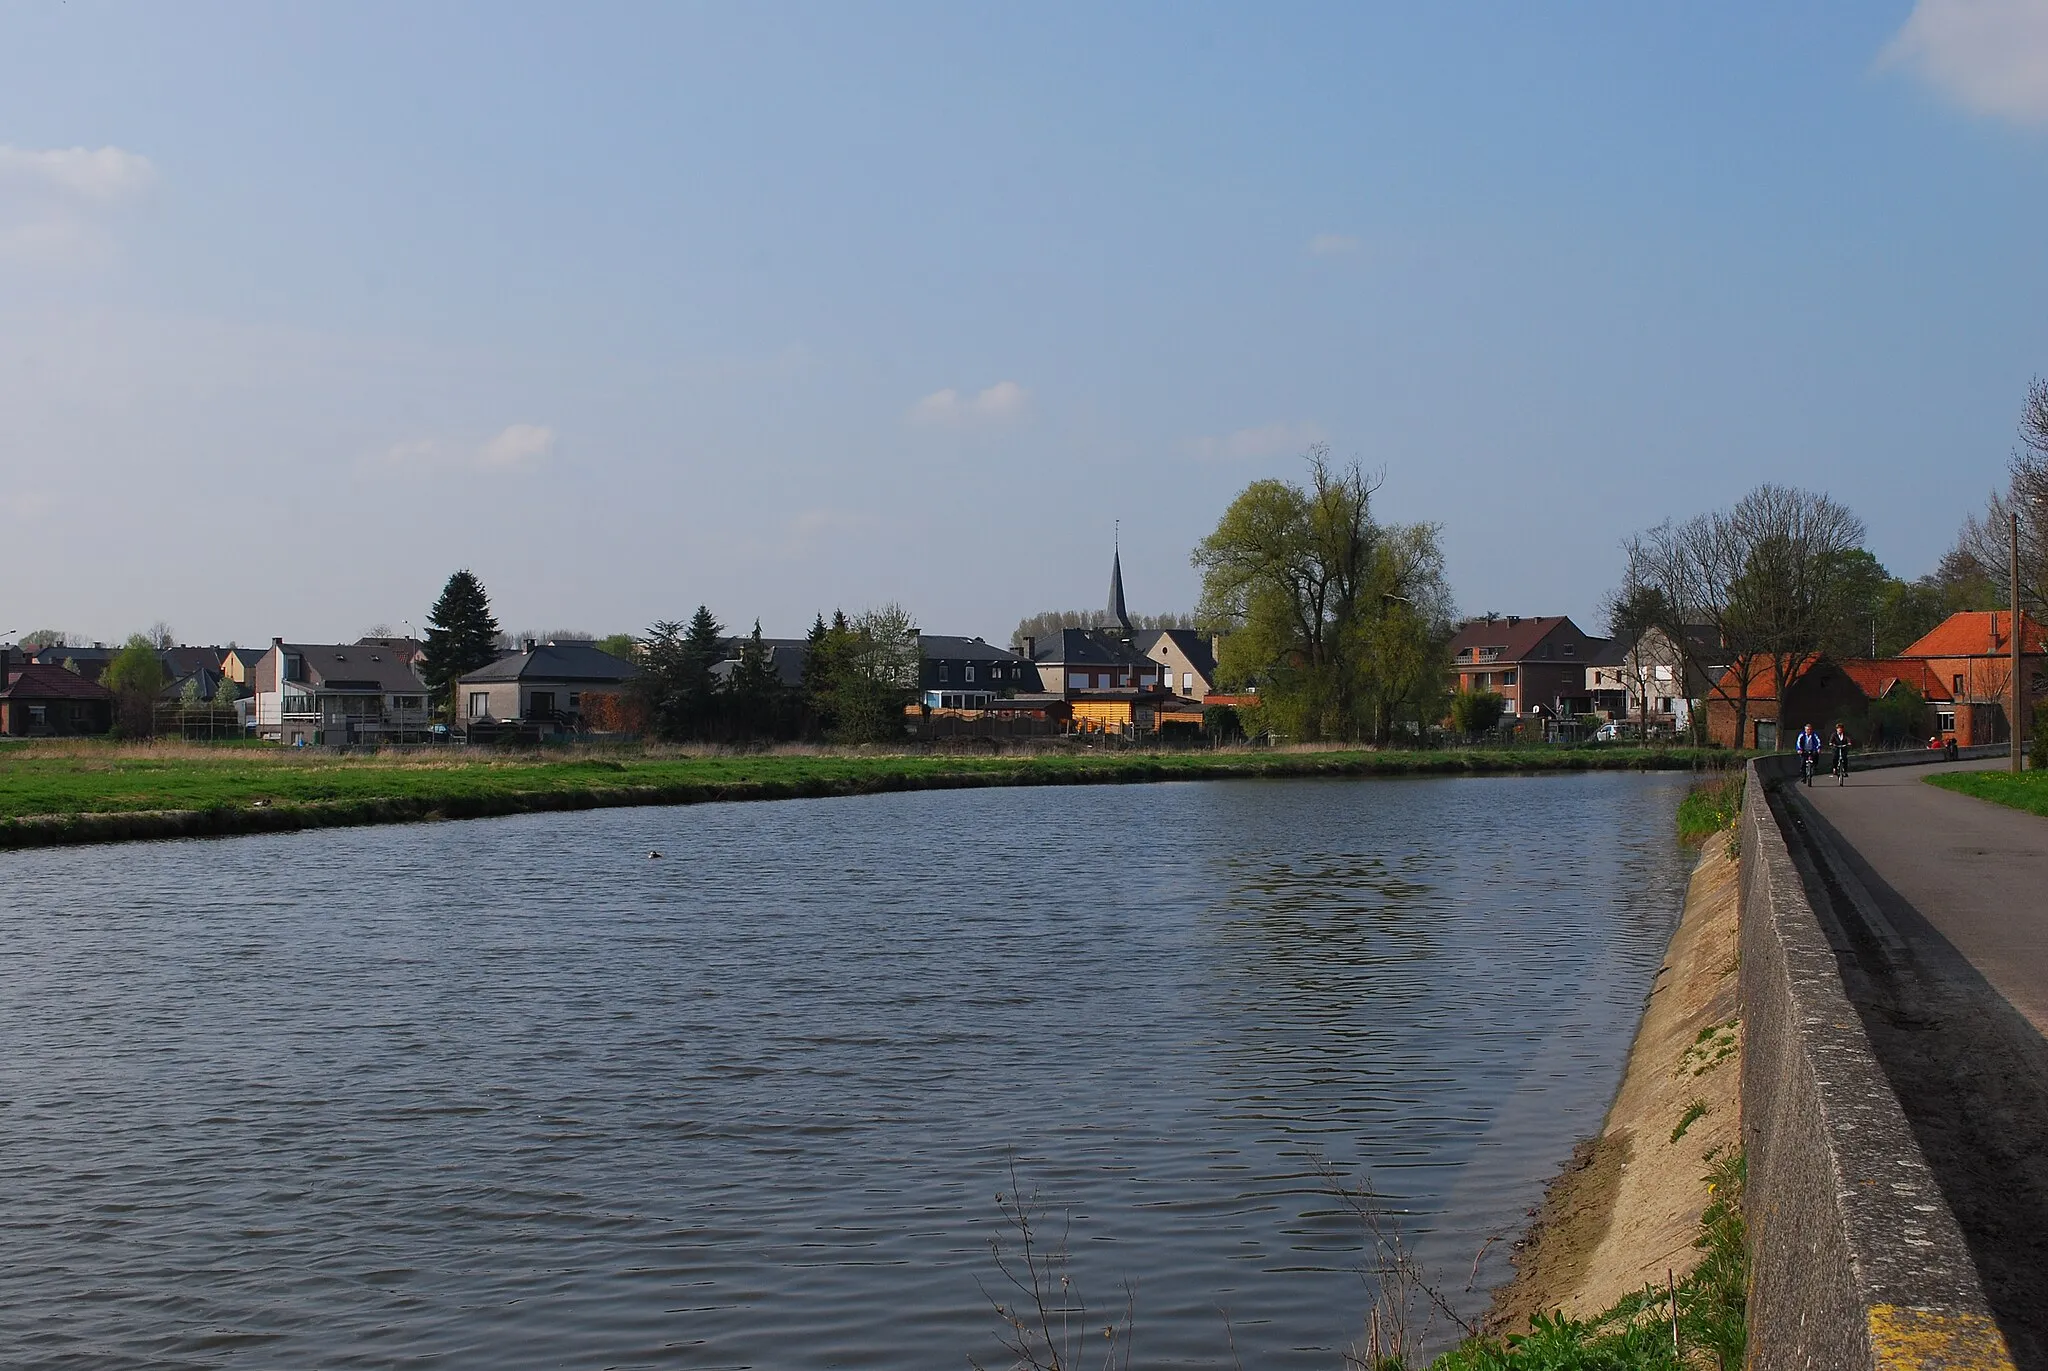 Photo showing: The river Dender at the village of Okegem, commune of Ninove, Belgium. Nikon D60 f=28mm f/10 at 1/400s ISO 200.